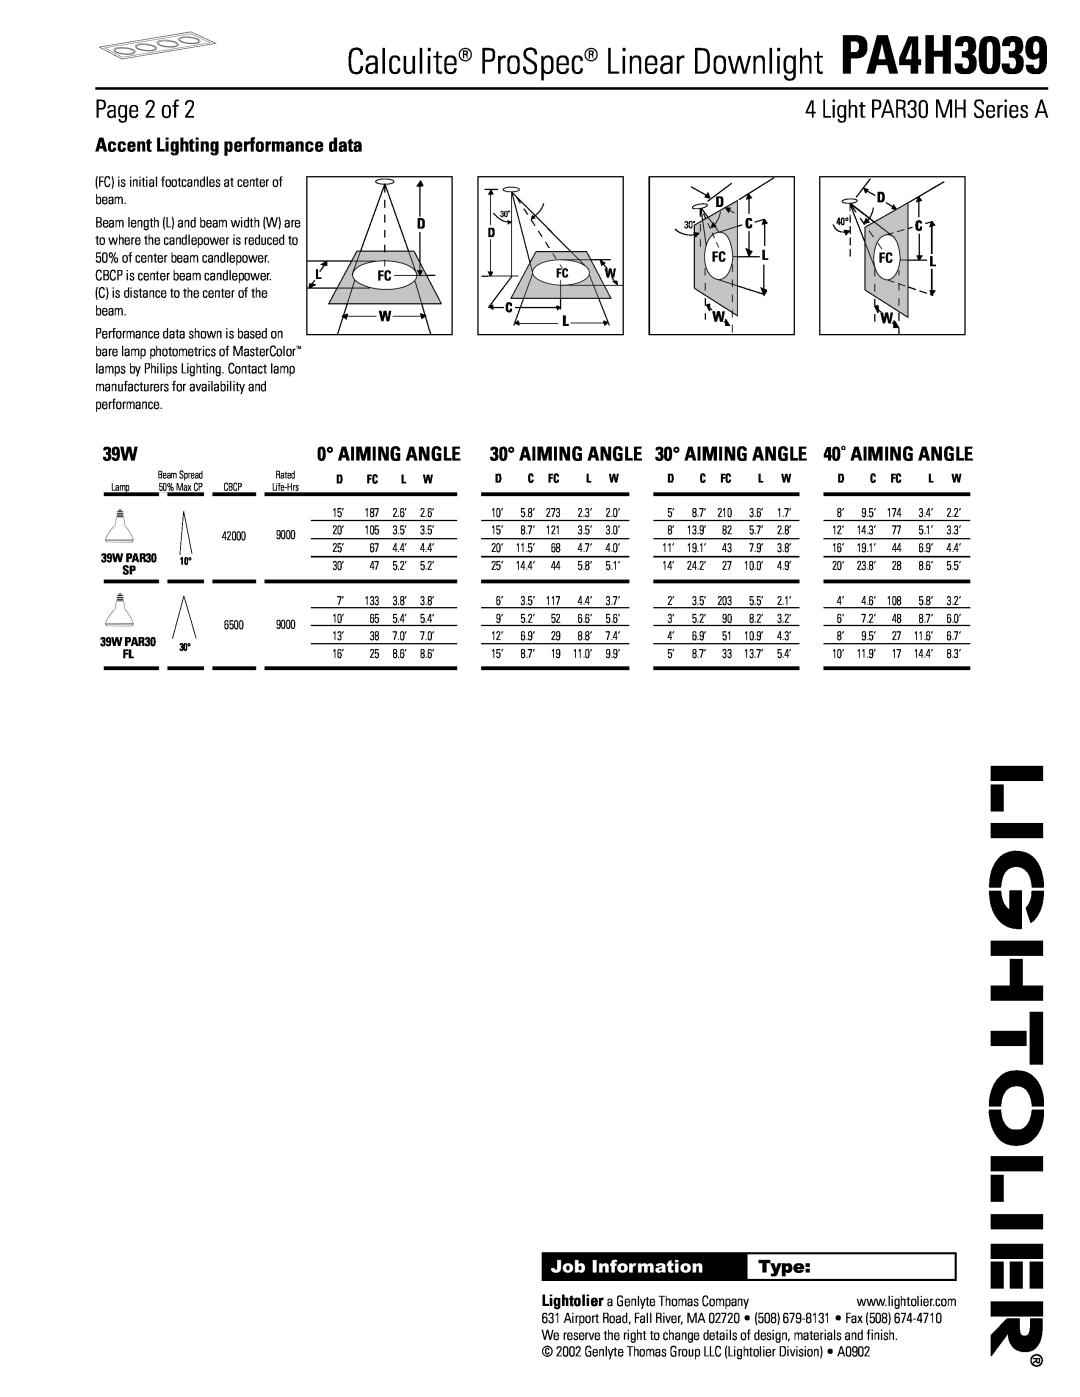 Lightolier Page 2 of, Accent Lighting performance data, Calculite ProSpec Linear Downlight PA4H3039, Aiming Angle, Type 